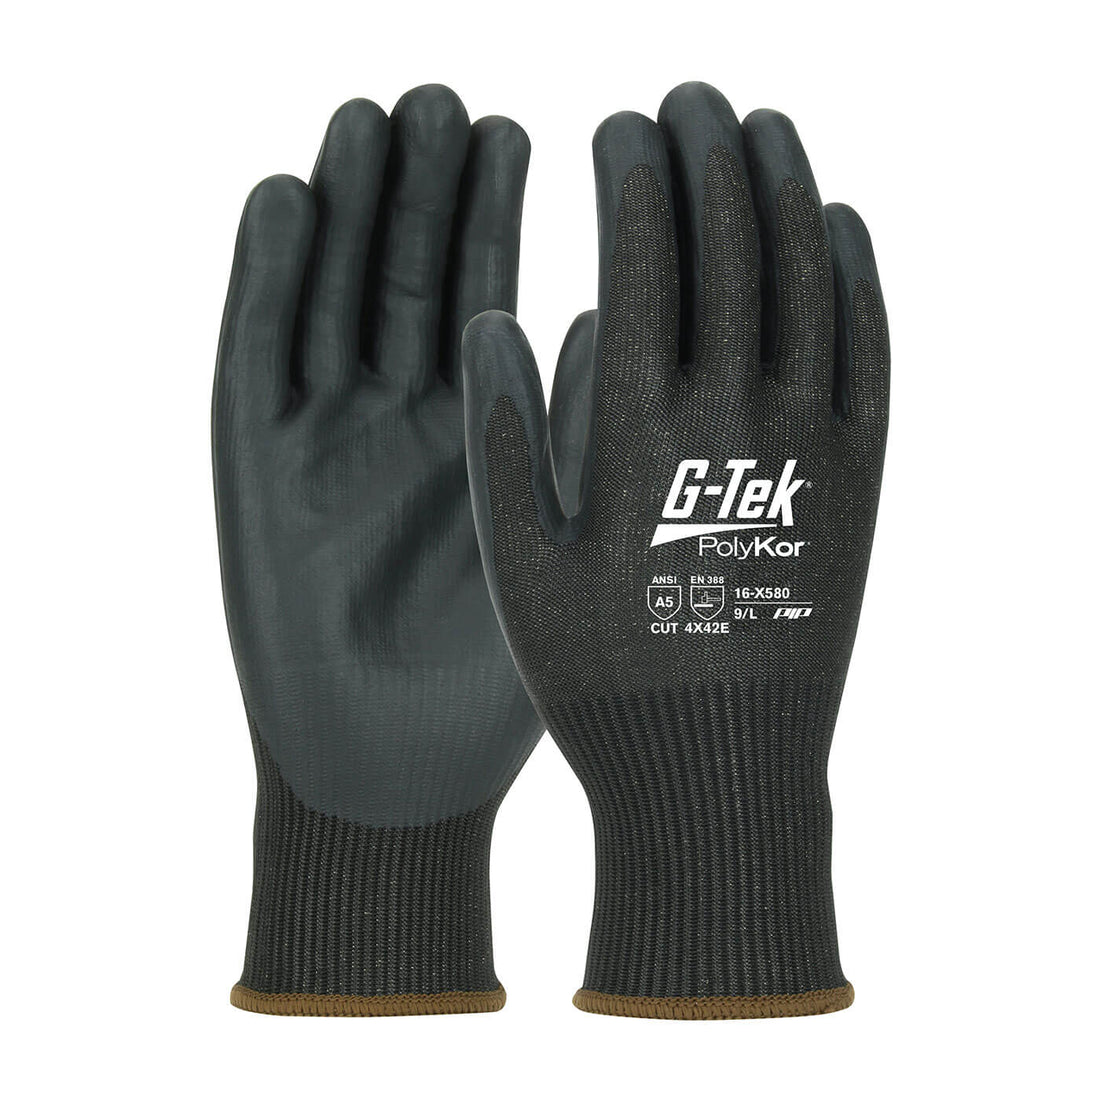 Some Gloves We Recommend for the Pulp and Paper Industry